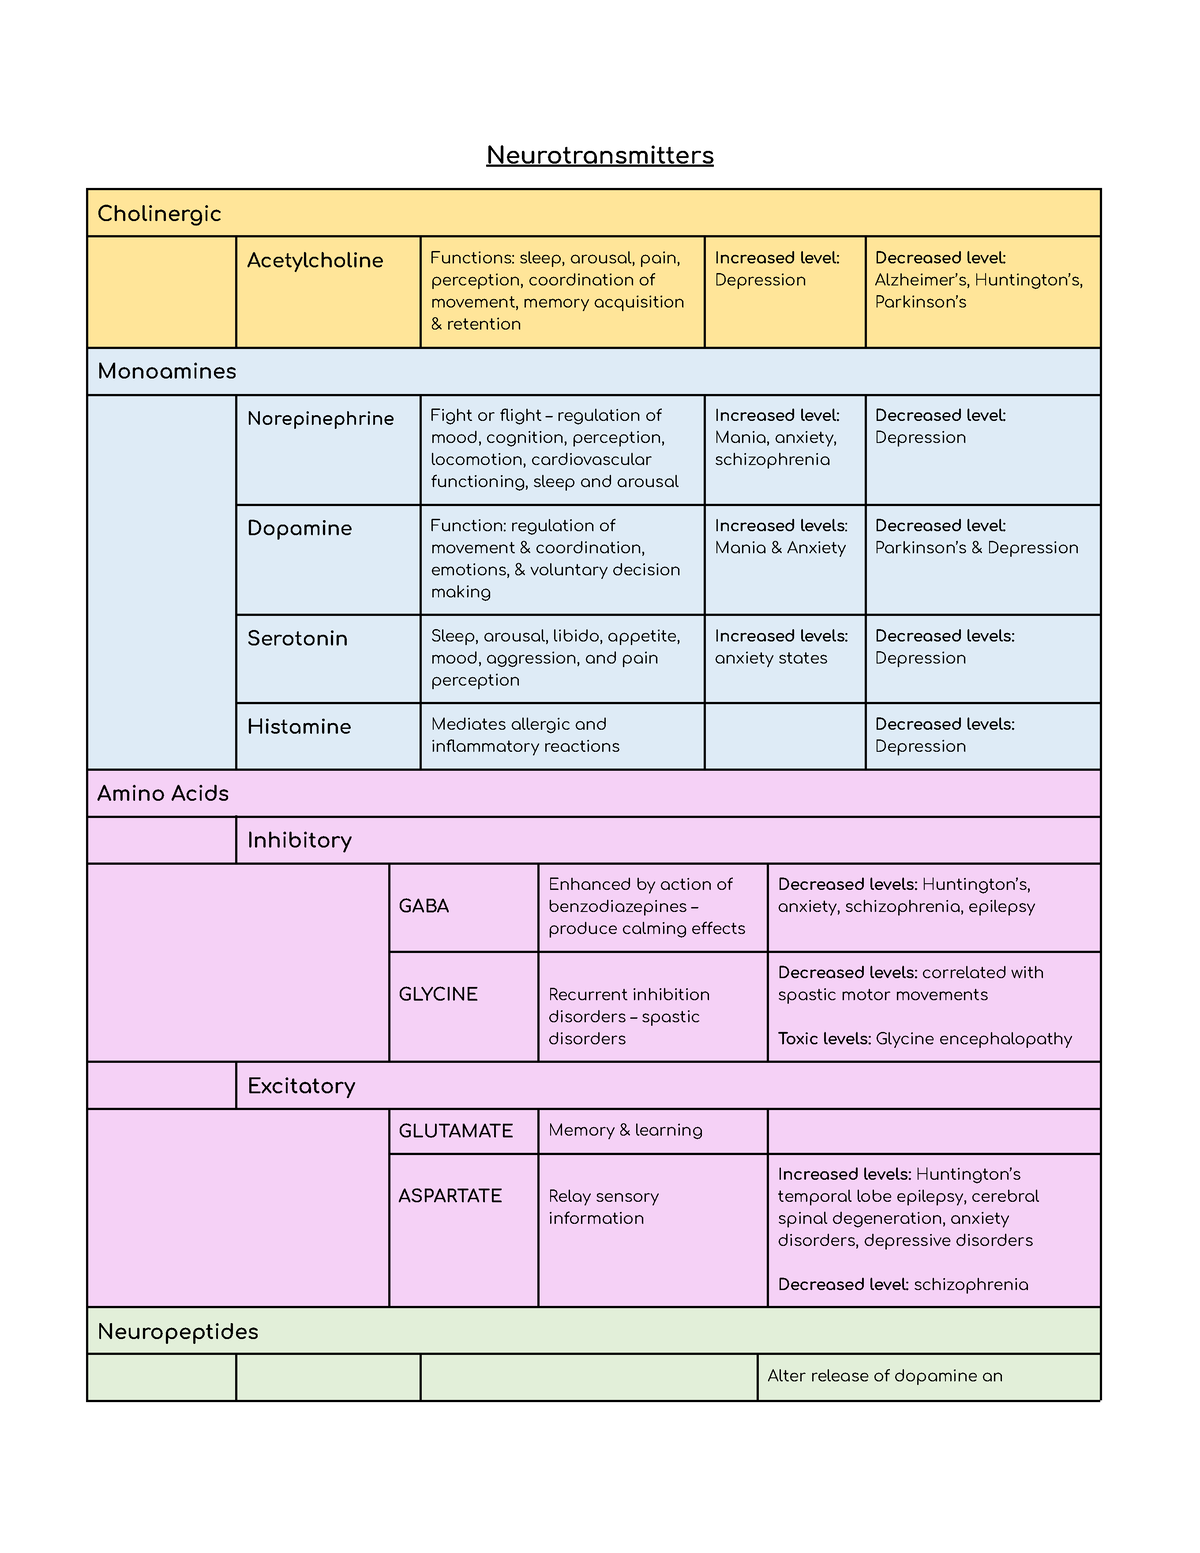 neurotransmitters and their functions chart